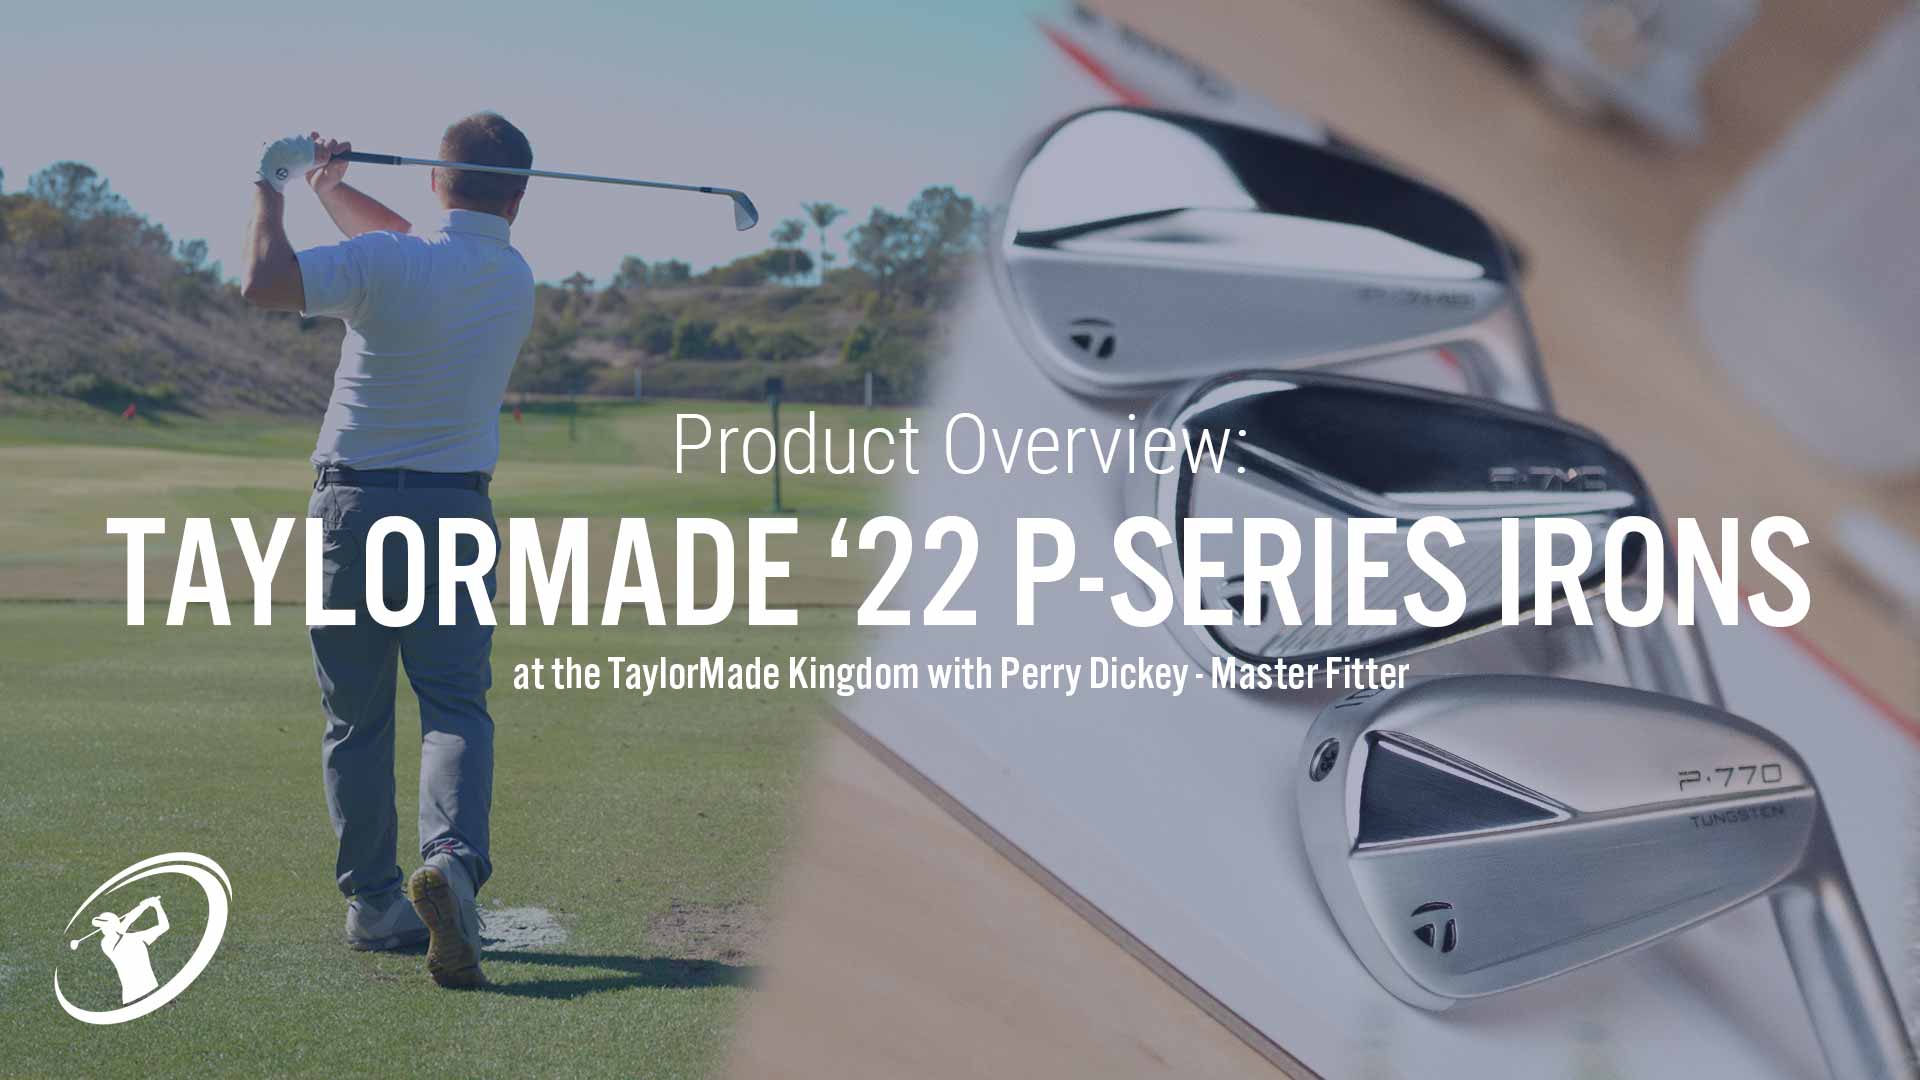 NEW TaylorMade P-SERIES IRONS overview at the TaylorMade Kingdom